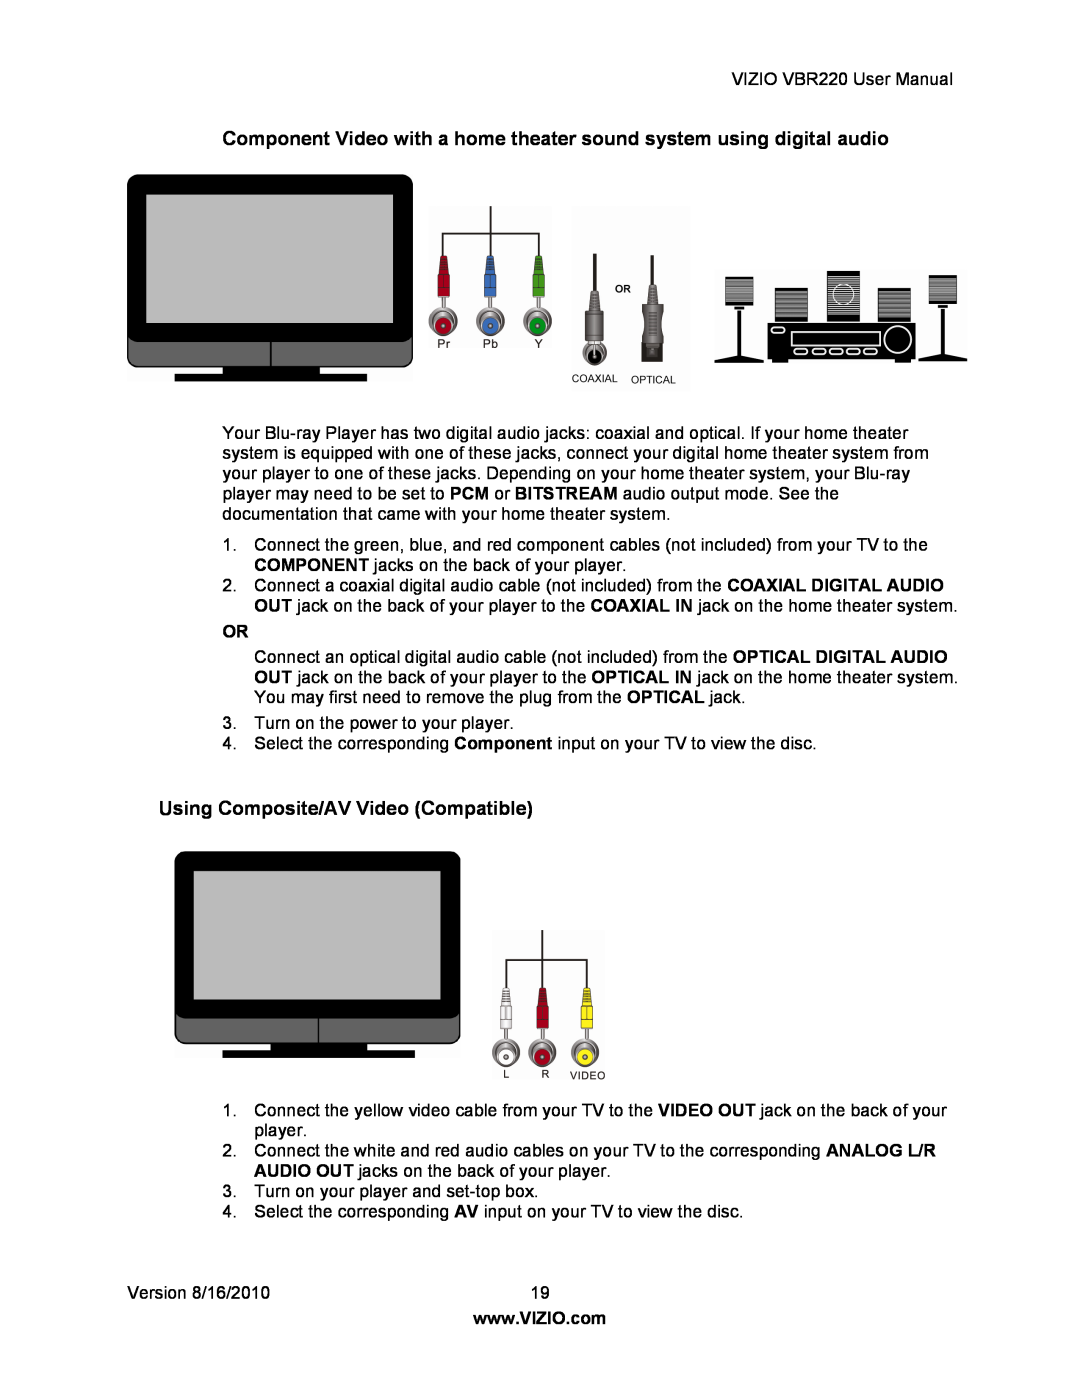 Panasonic VBR220 Component Video with a home theater sound system using digital audio, Using Composite/AV Video Compatible 